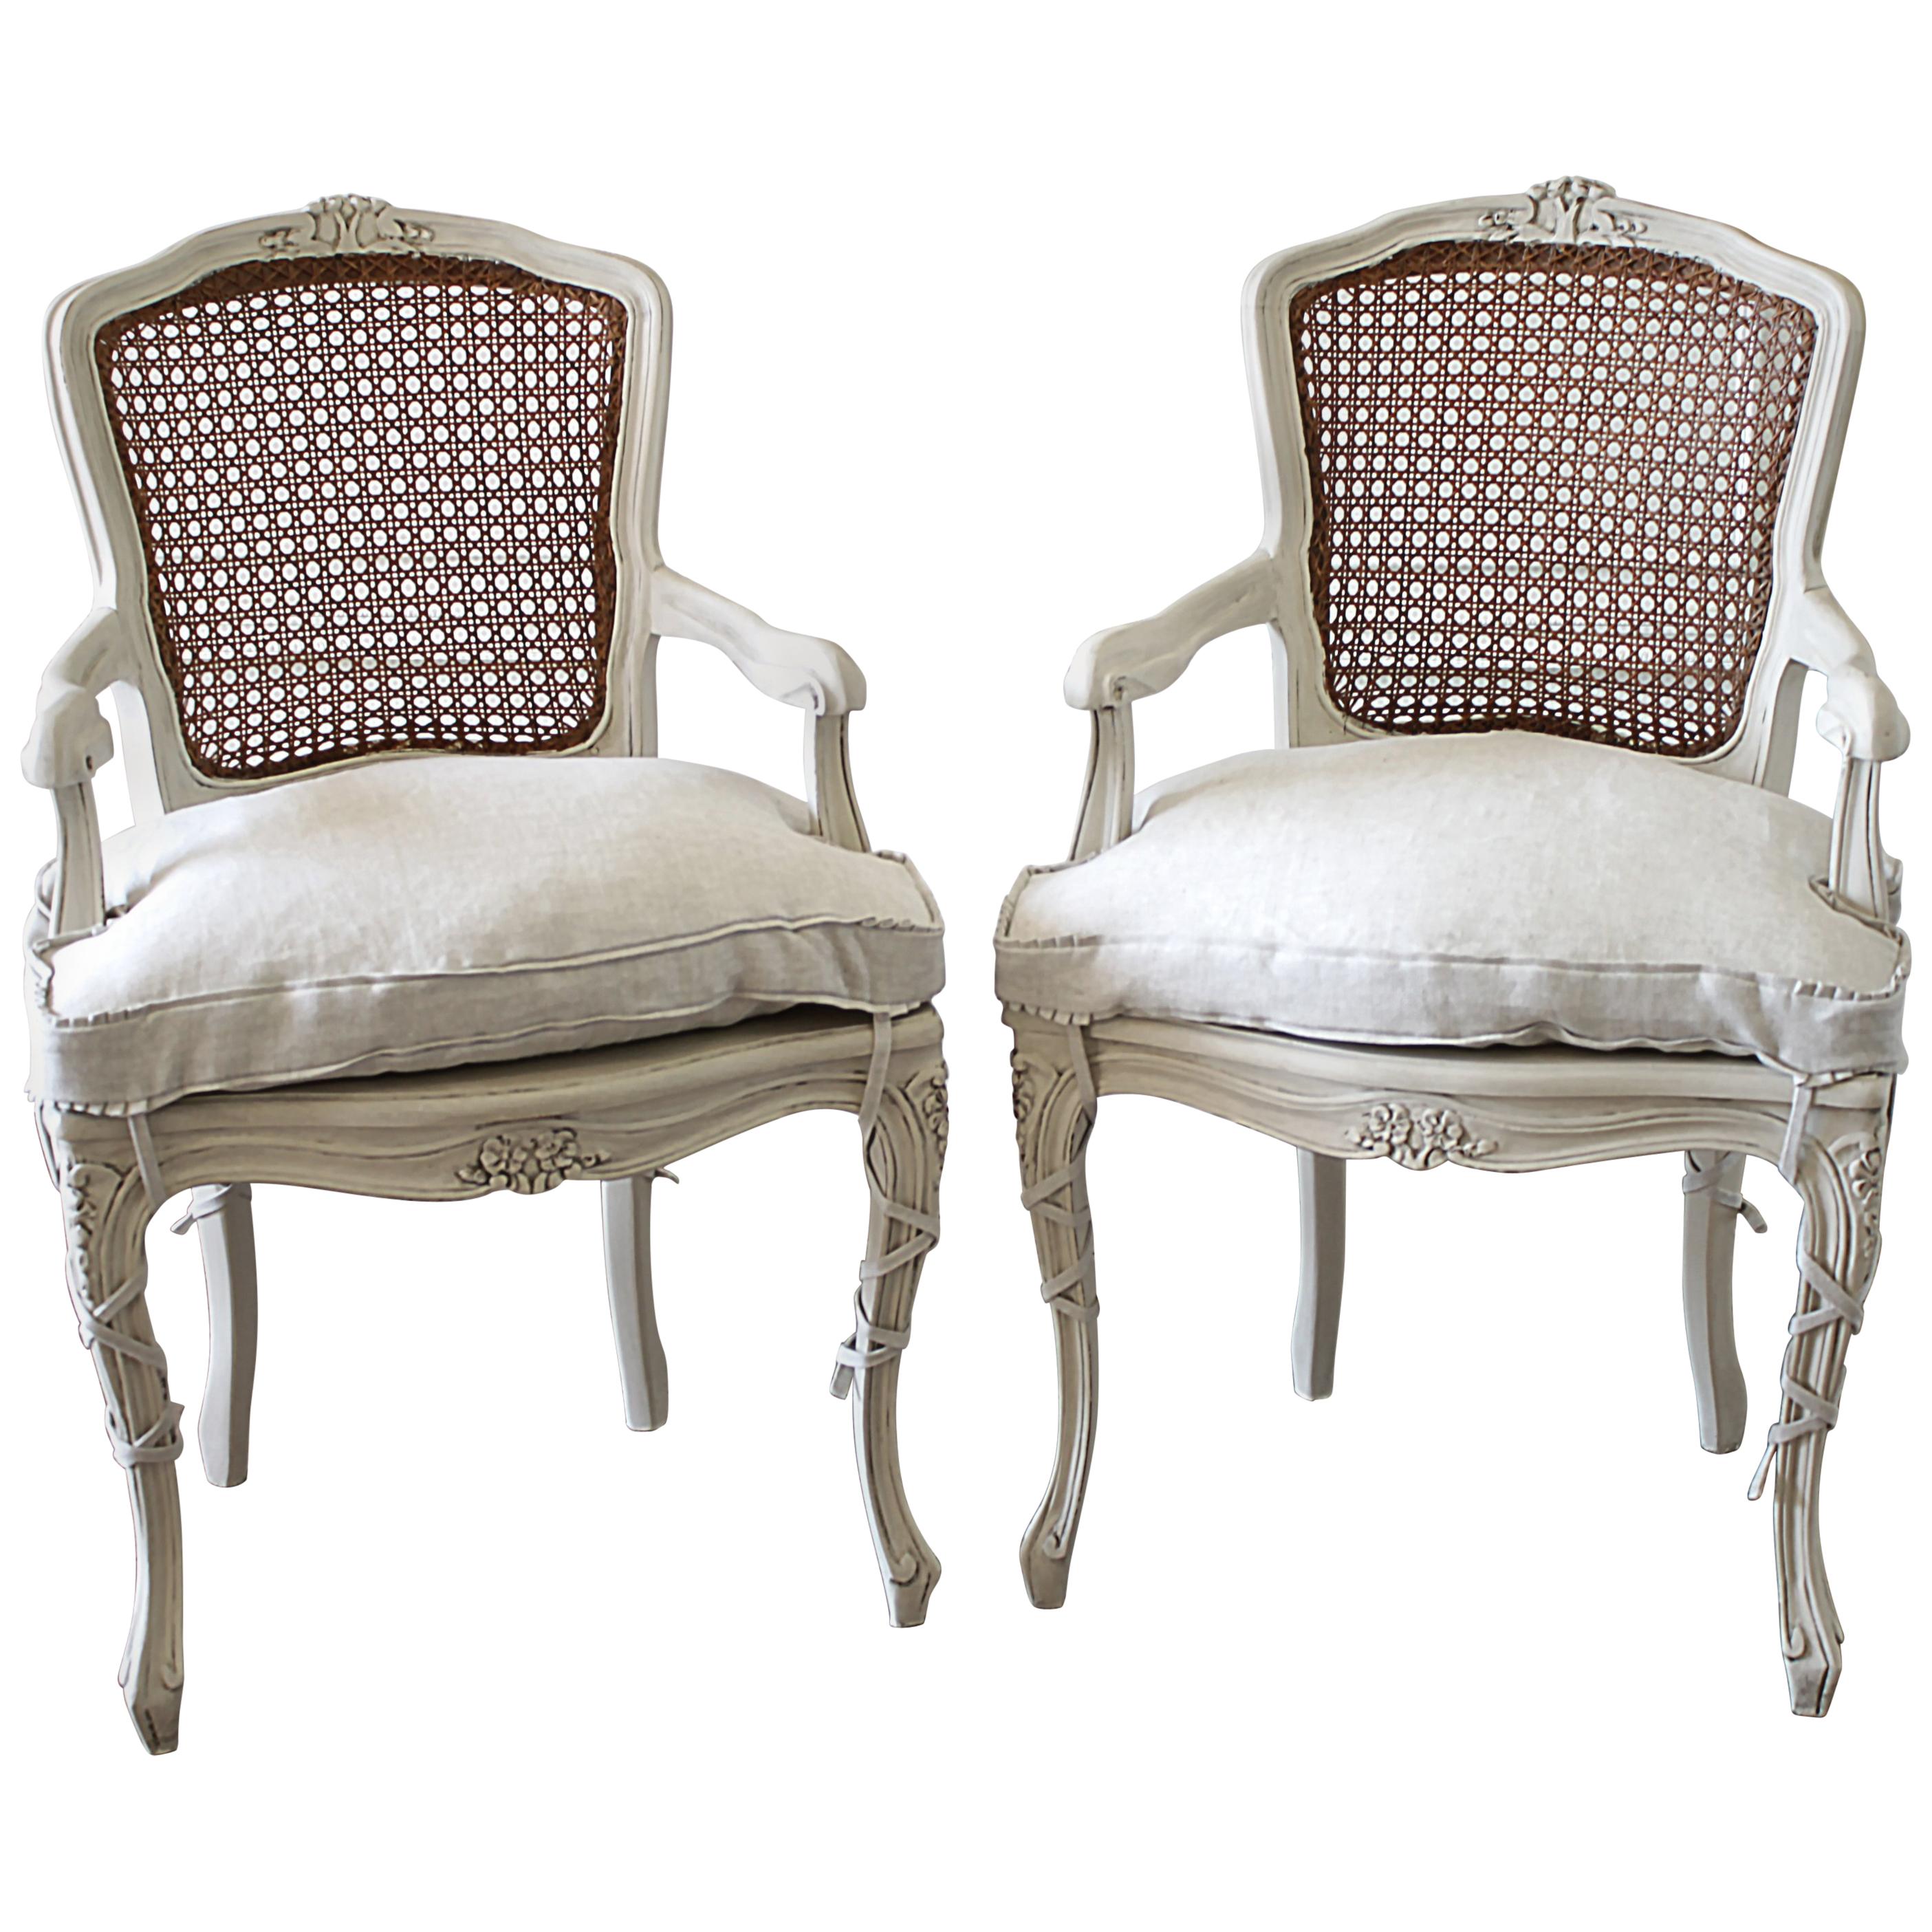 20th Century Pair of Painted Cane Back Open Armchairs with Linen Slipcovers